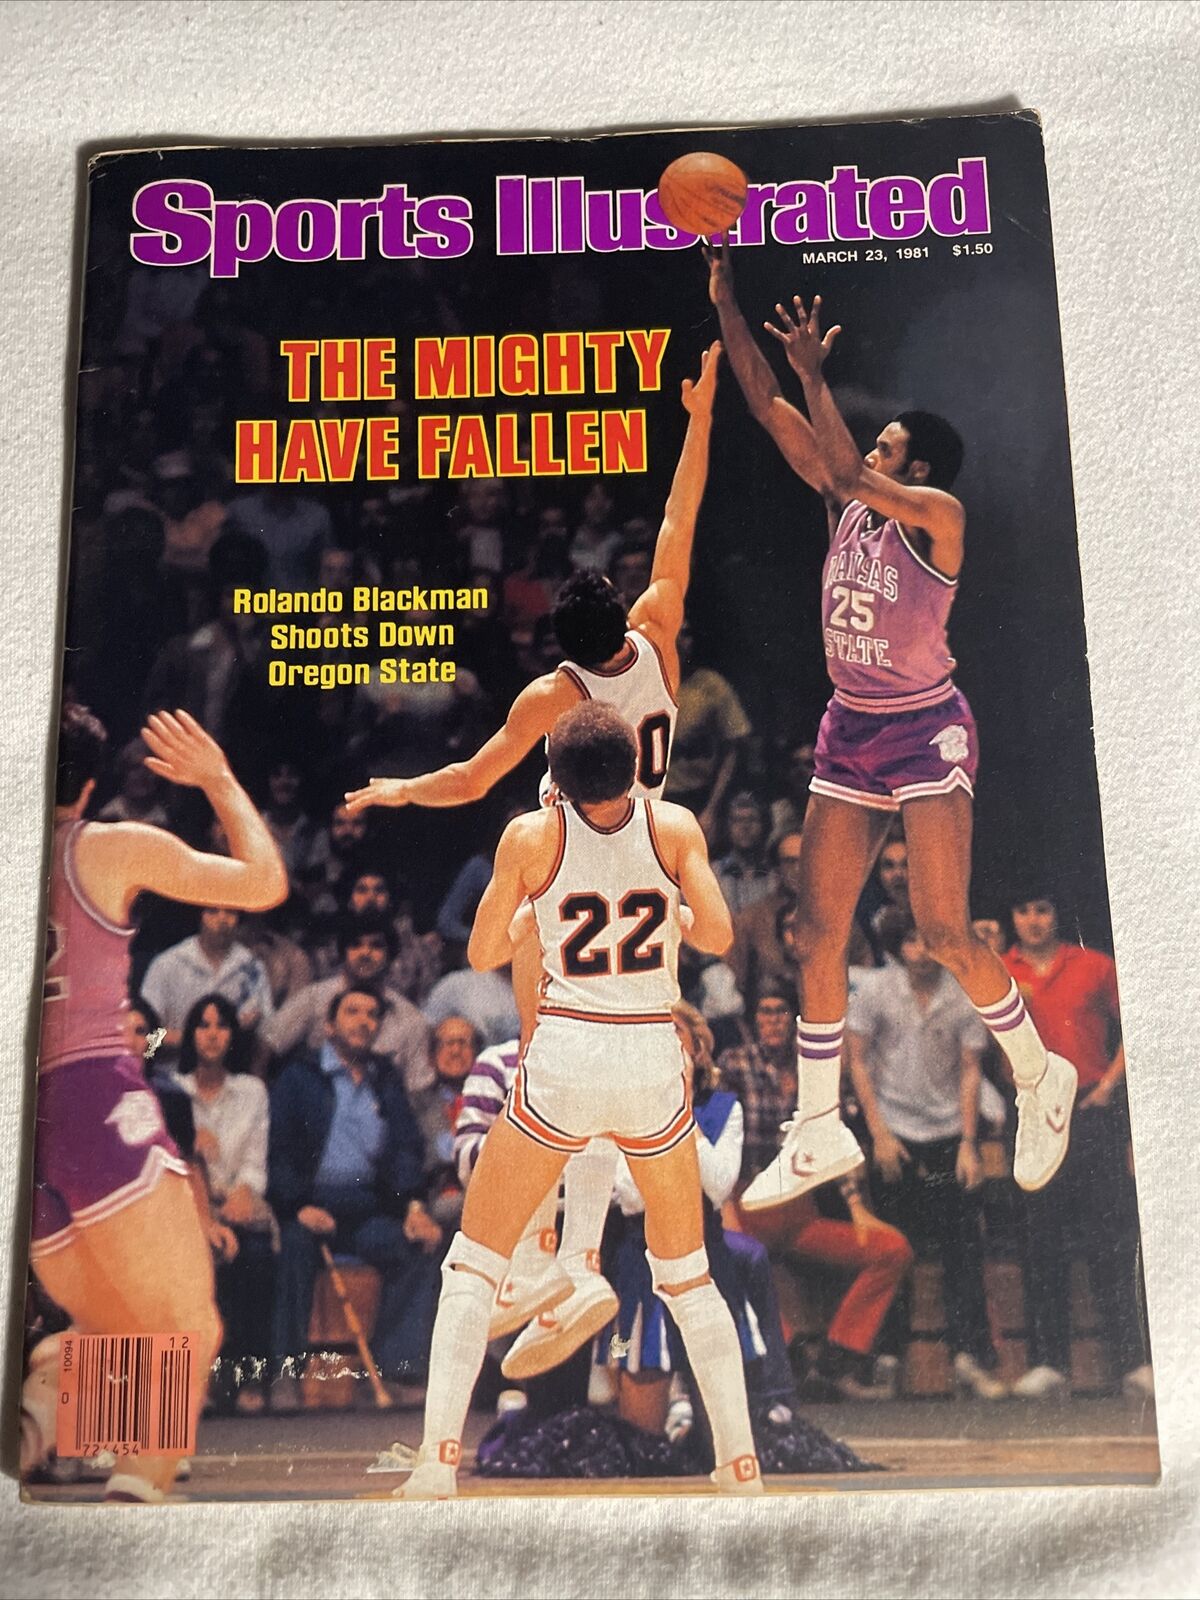 1981 March 23 Sports Illustrated Magazine, The mighty have fallen   (CP246)